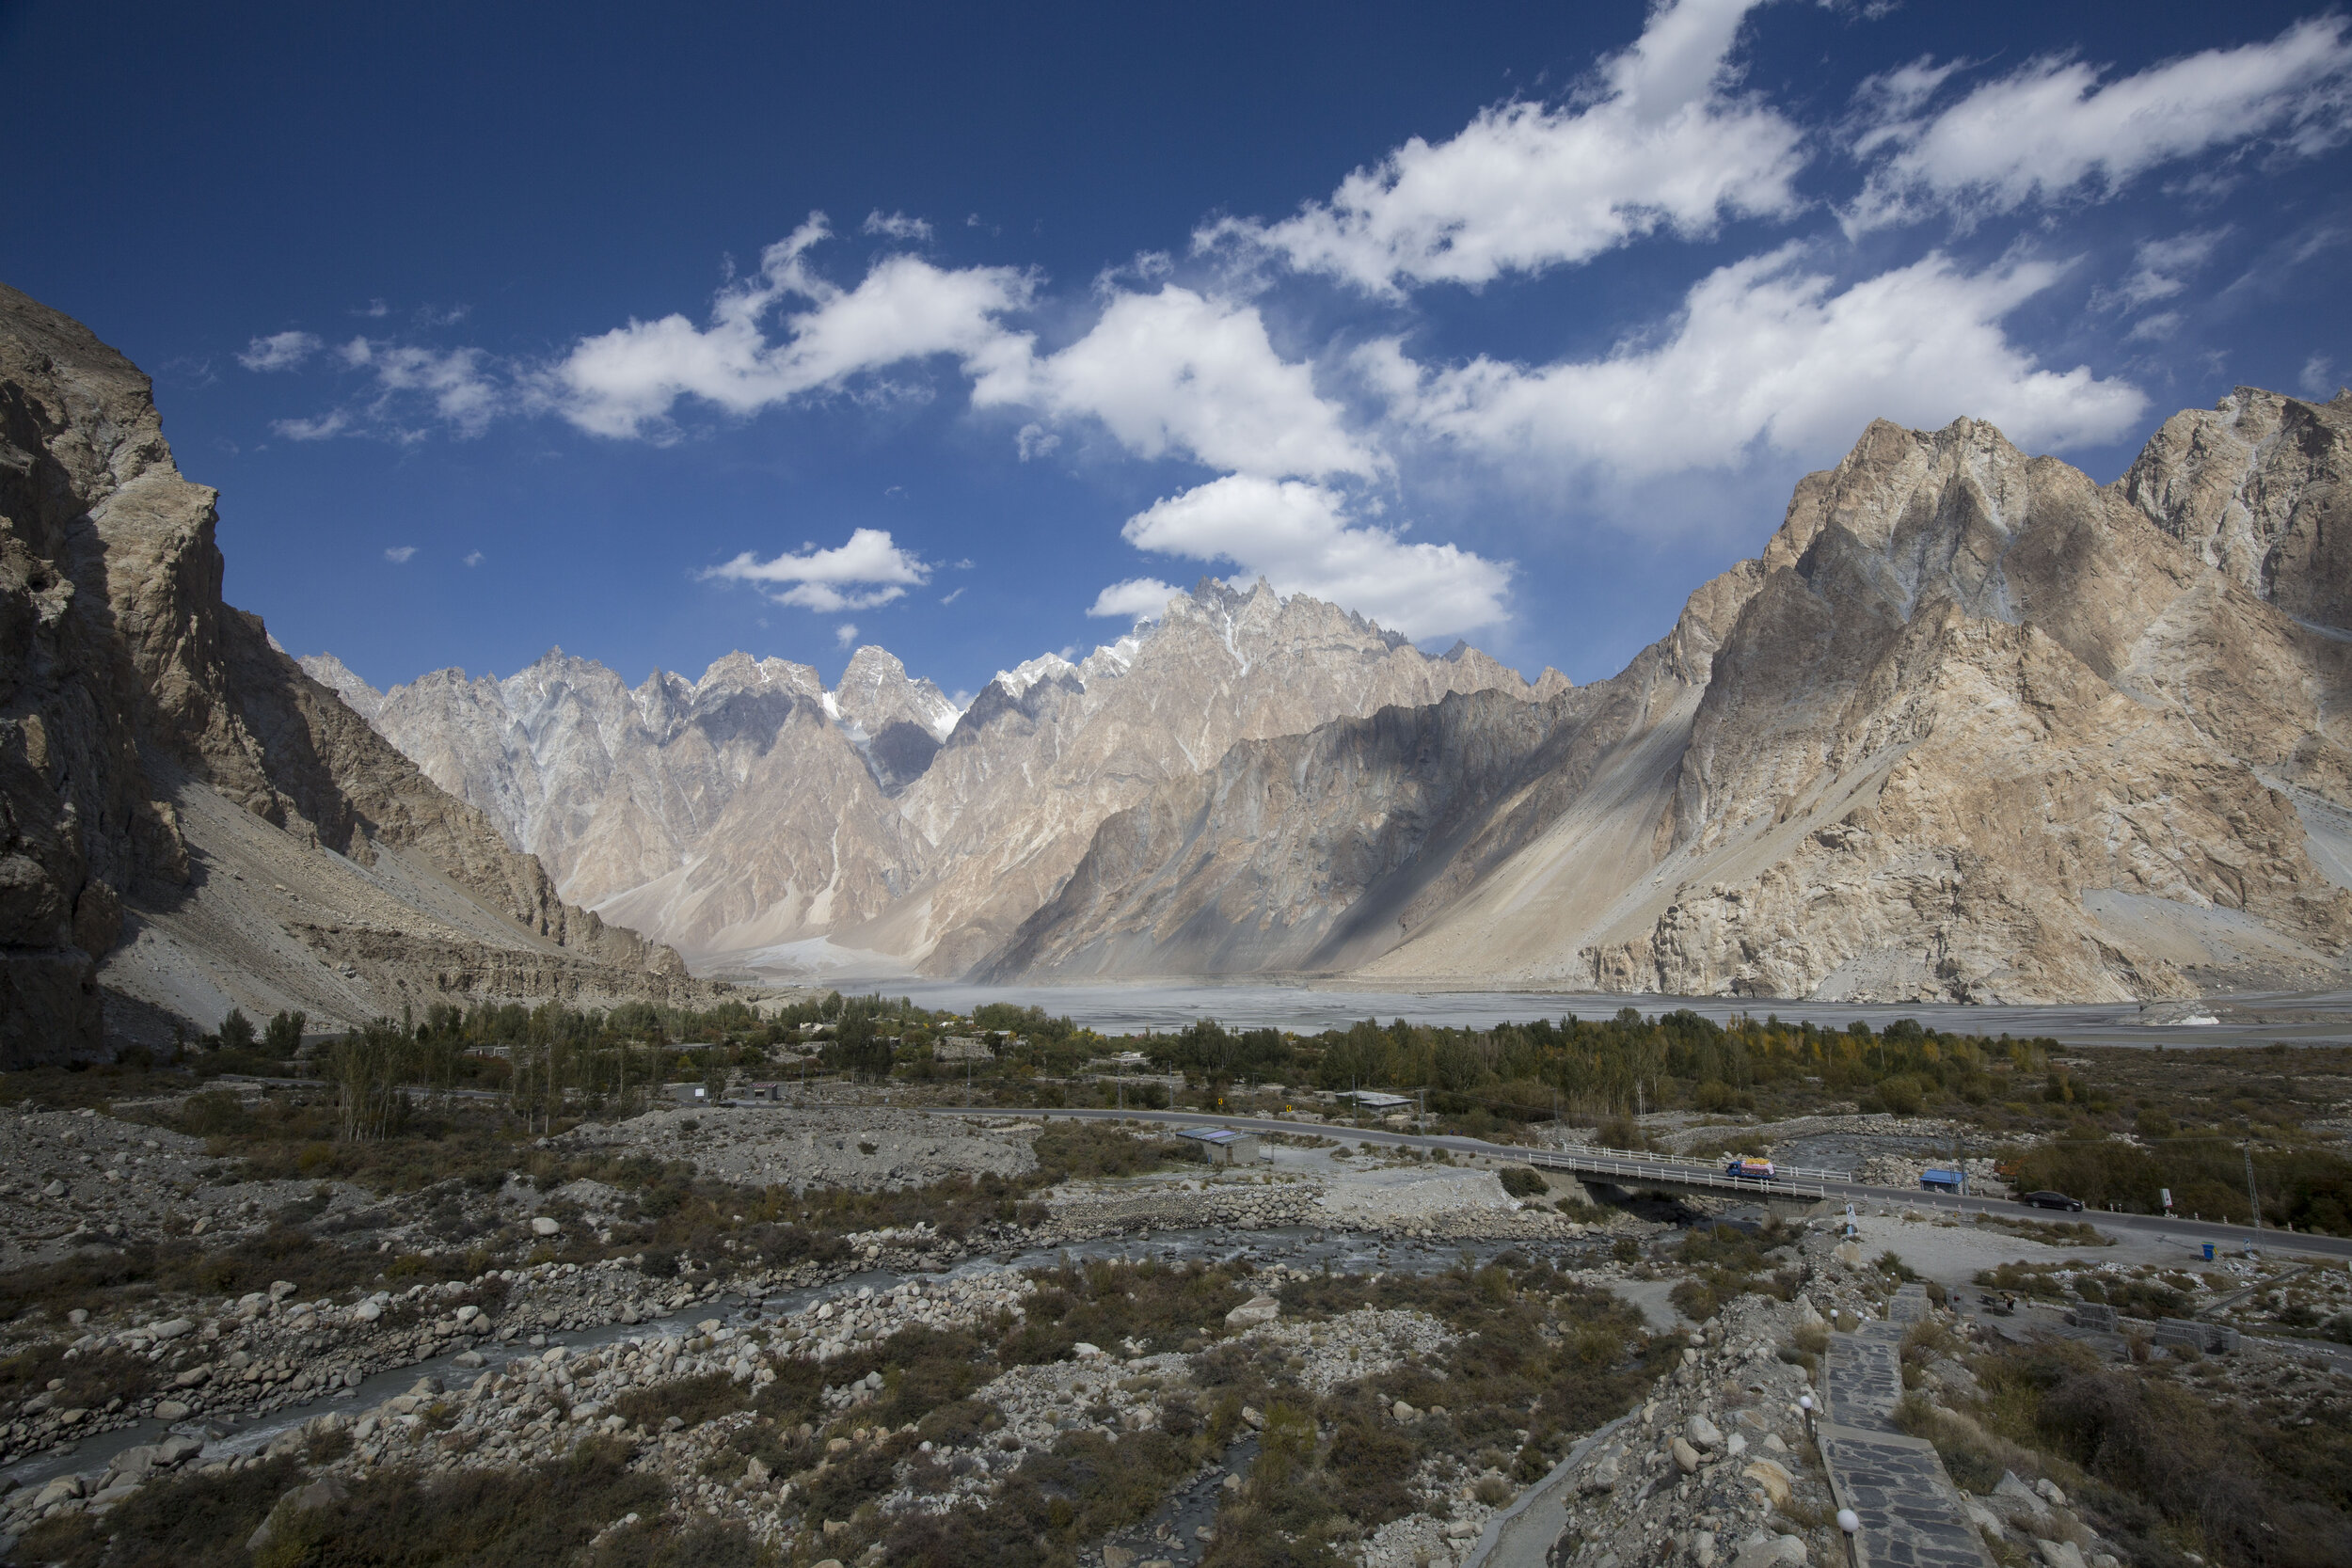  A view of the Passu cones from a cafe where locals visit to use the free Wifi.  